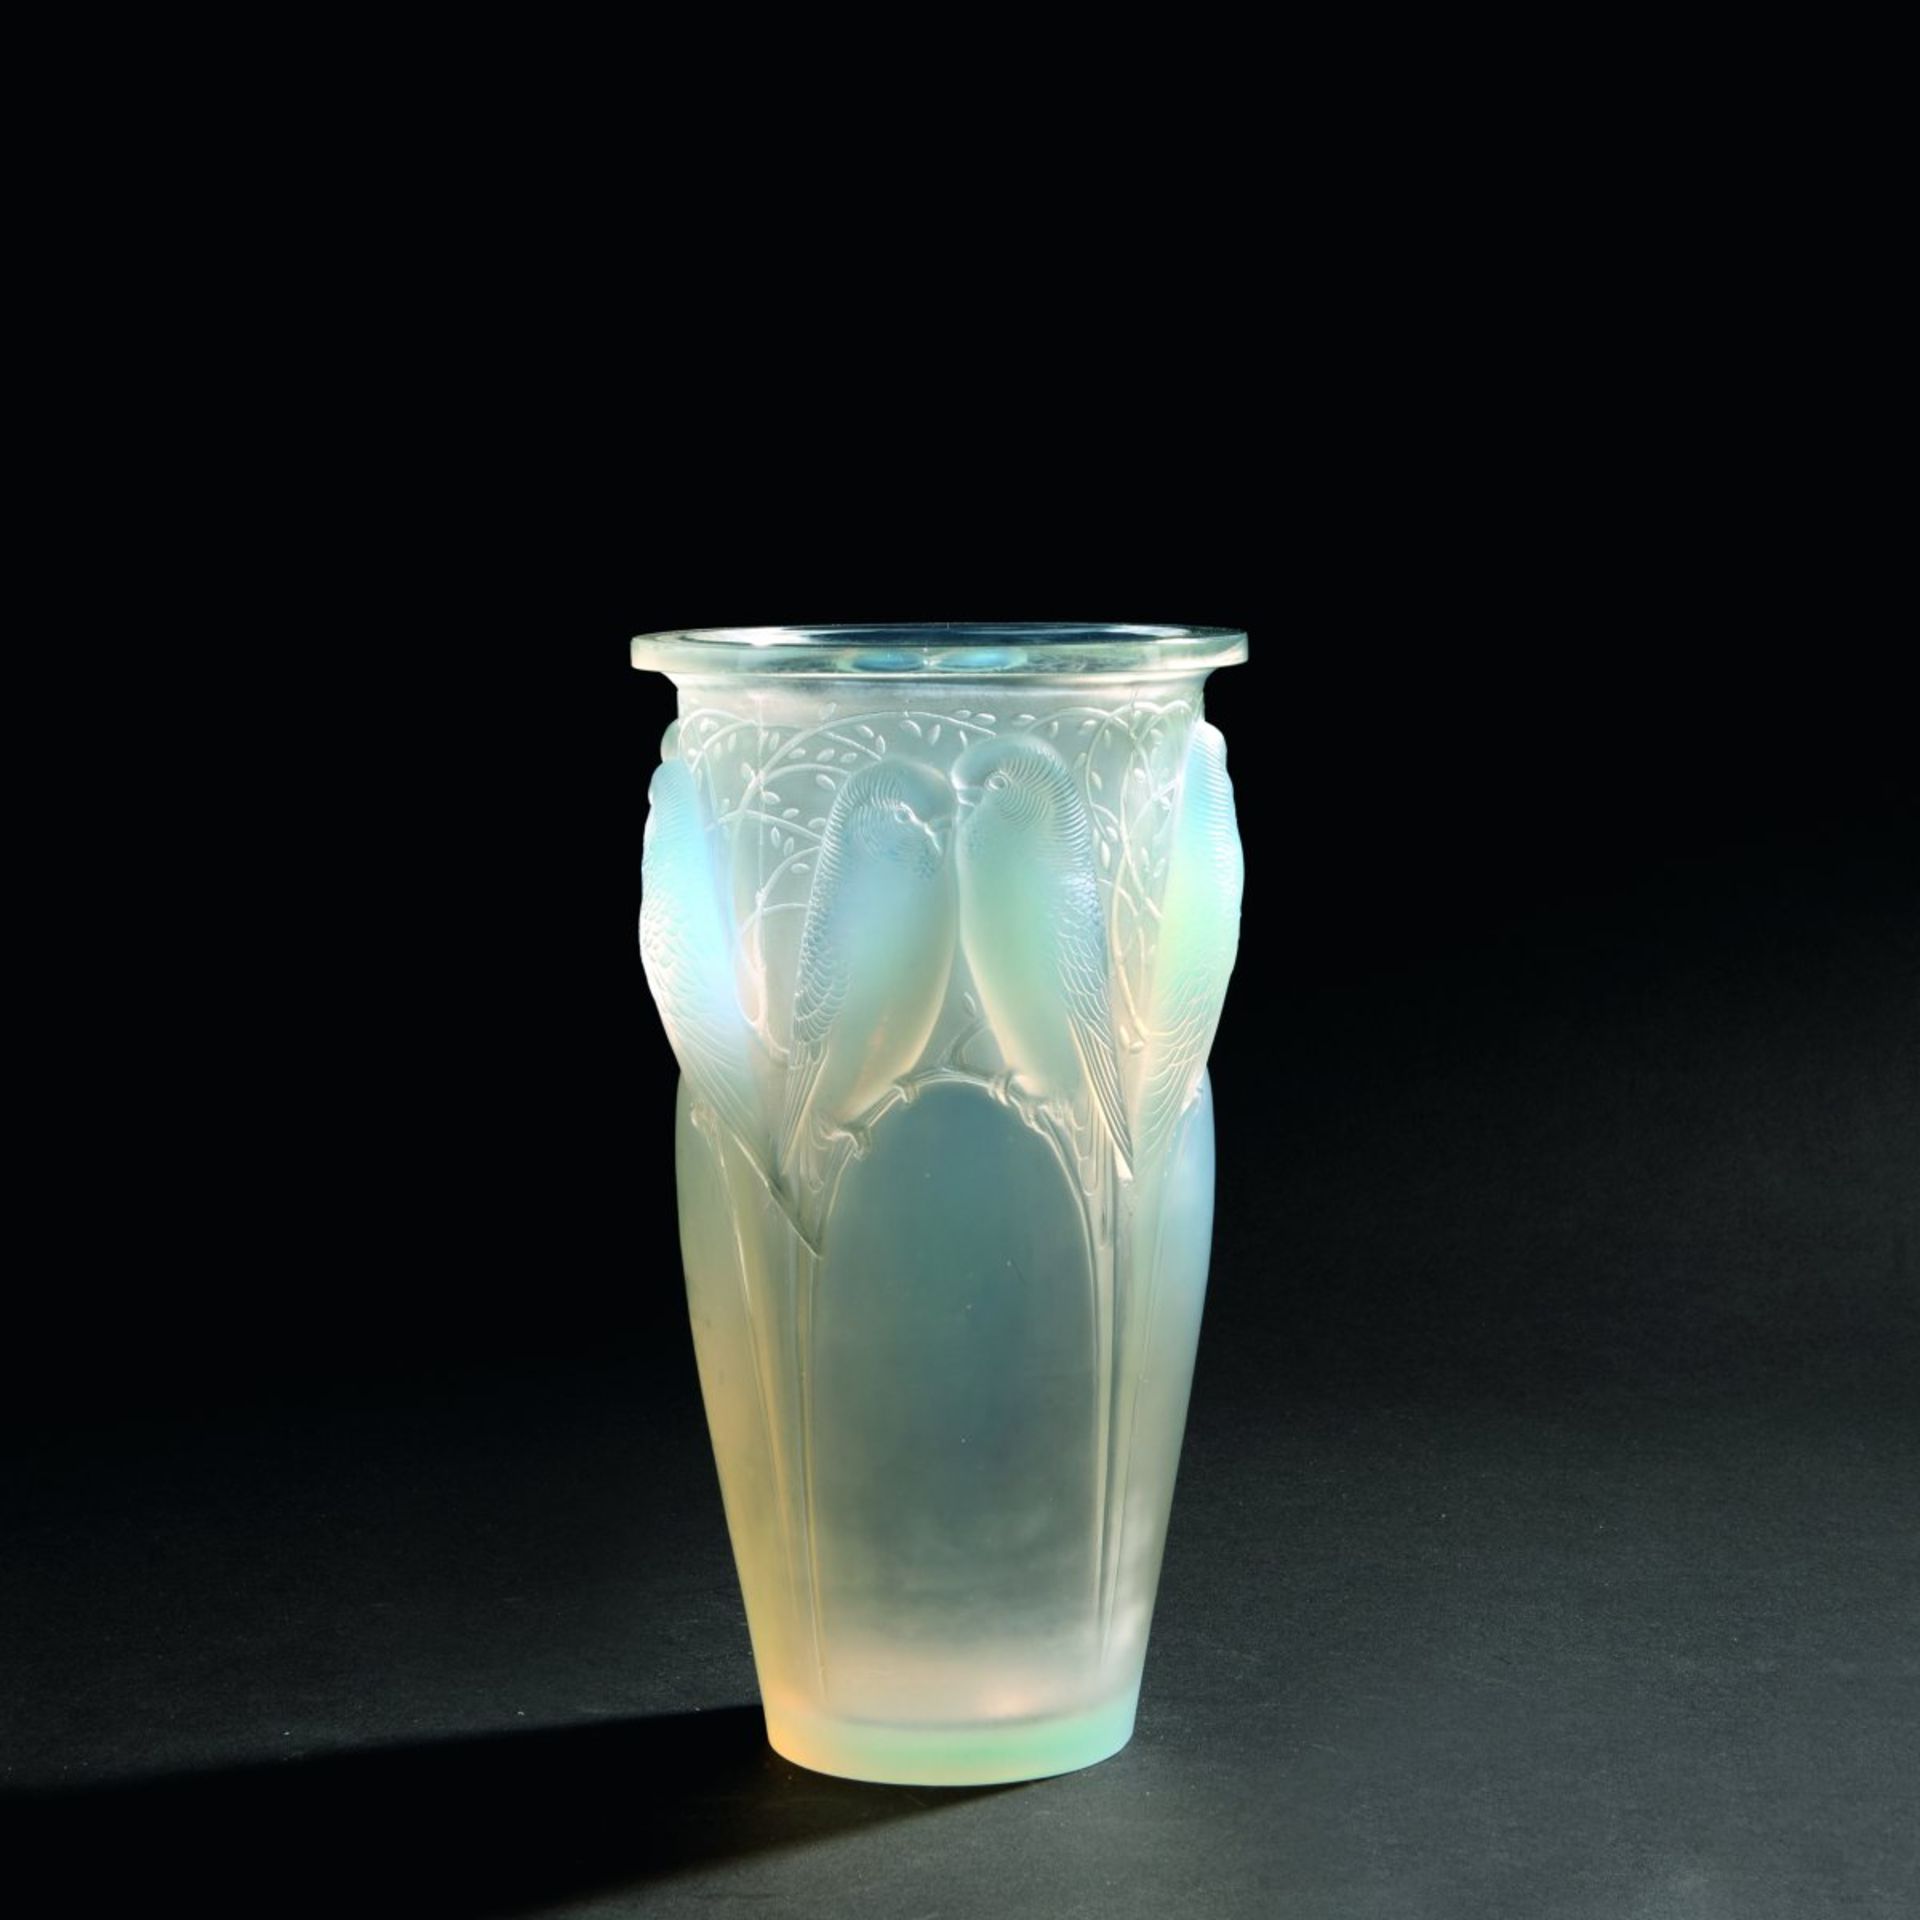 René Lalique, 'Ceylan' vase, 1924'Ceylan' vase, 1924H. 24 cm. Clear moulded glass, satined and